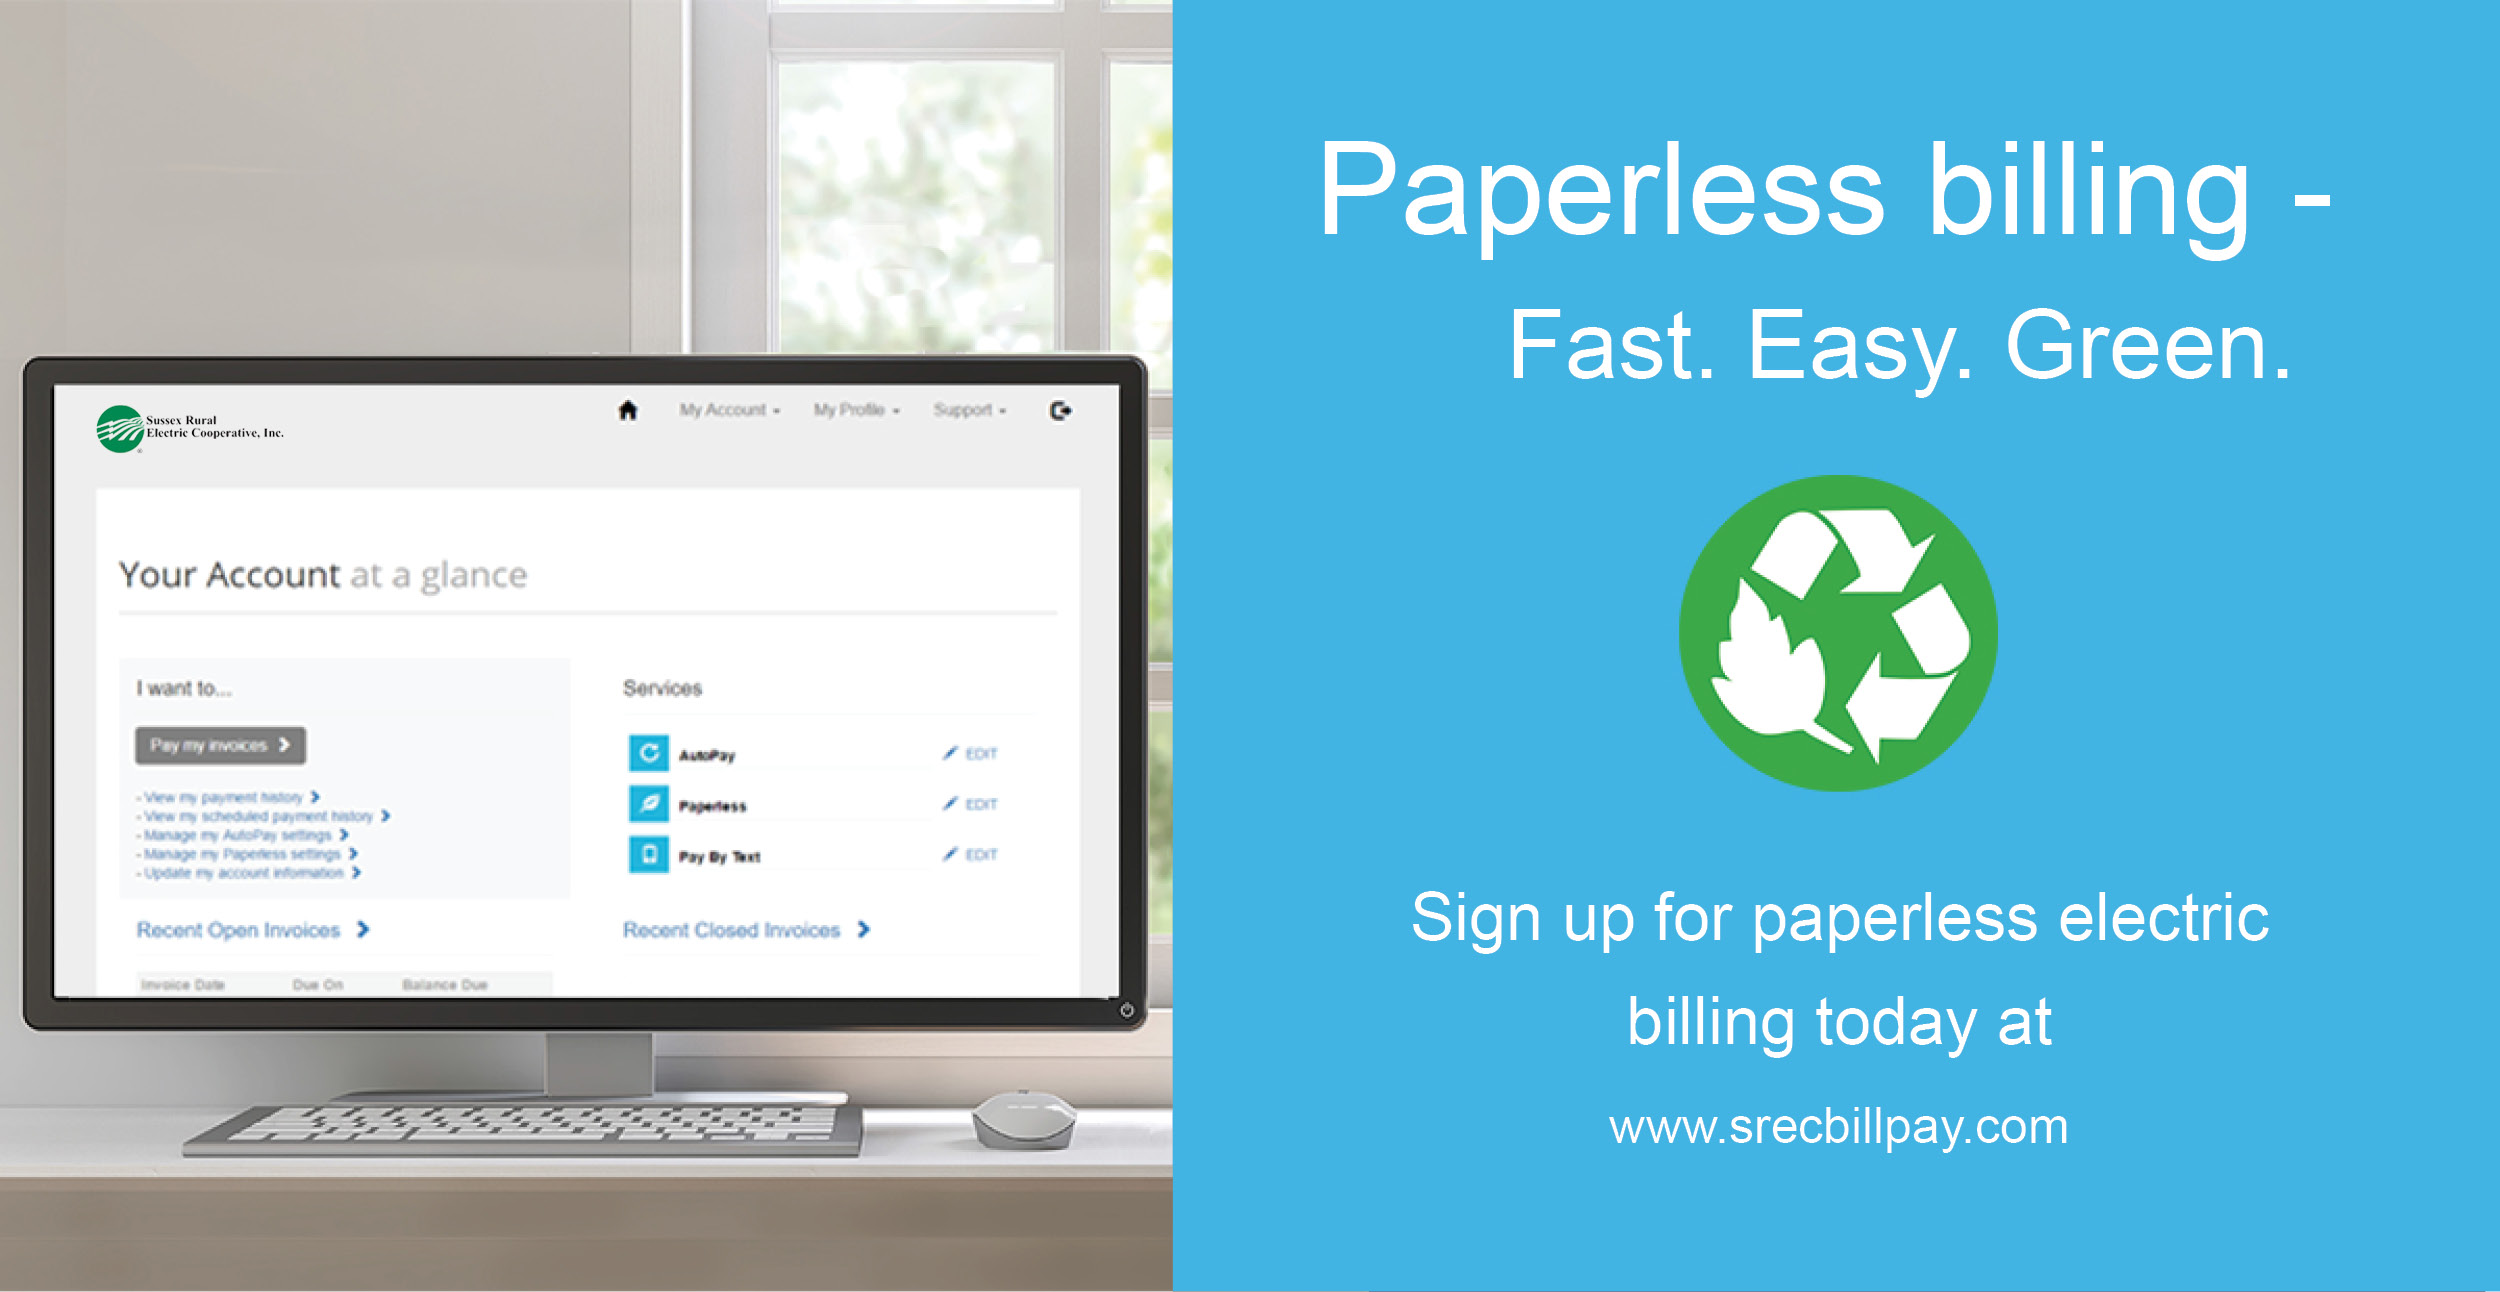 Image of a computer screen where someone is paying their Sussex Rural Electric Cooperative bill. Text reads: "Paperless billing - Fast. Easy. Green. Sign up for paperless electric billing today at www.srecbillpay.com."